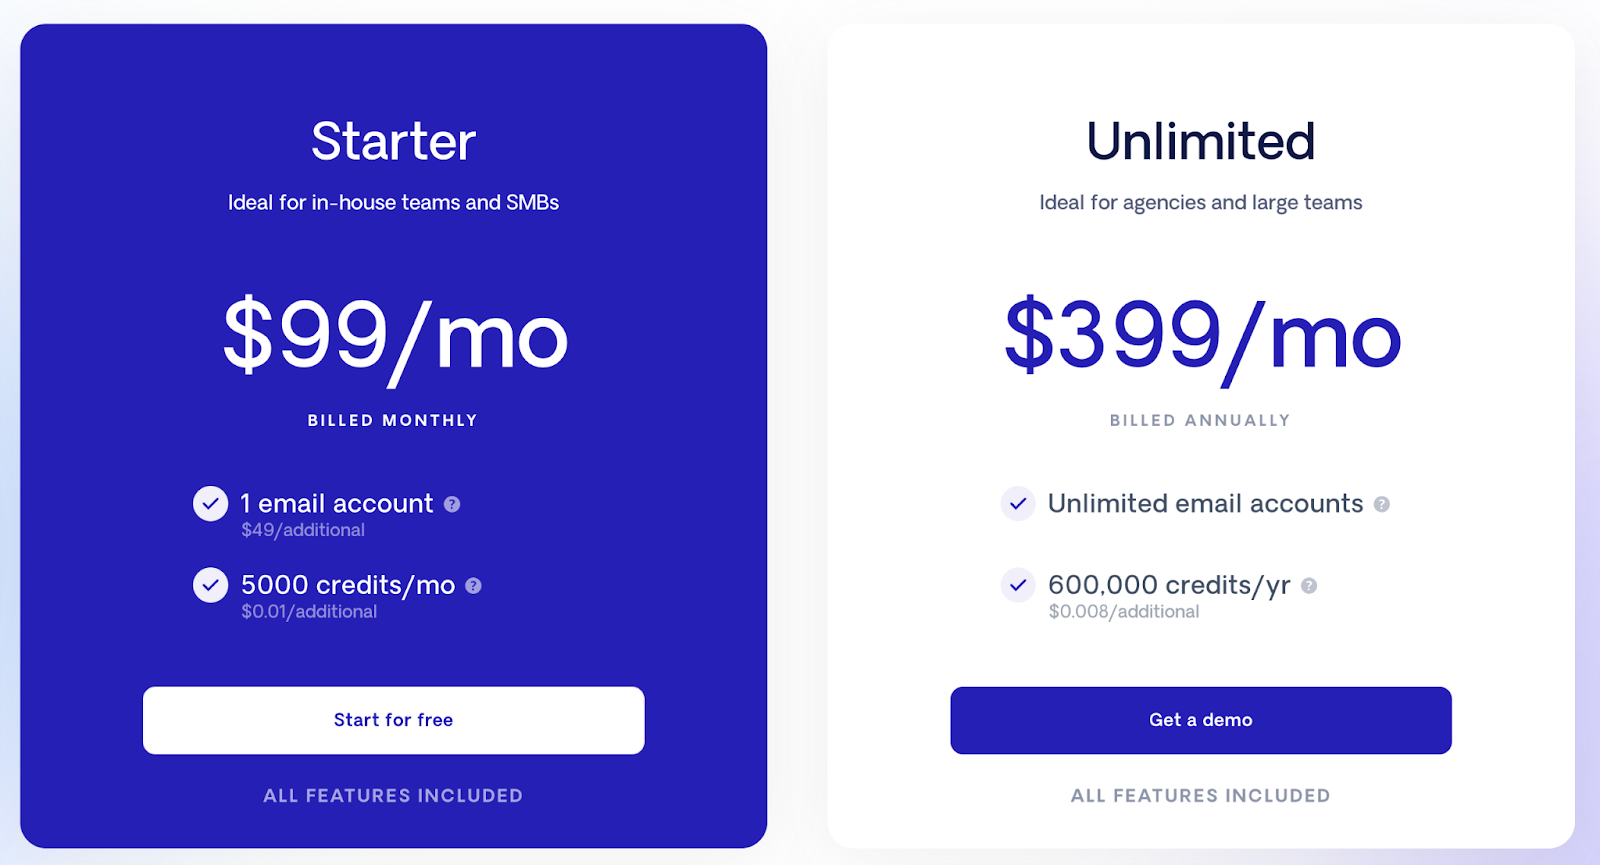 Respona’s pricing page showing prices for Starter and Unlimited plans